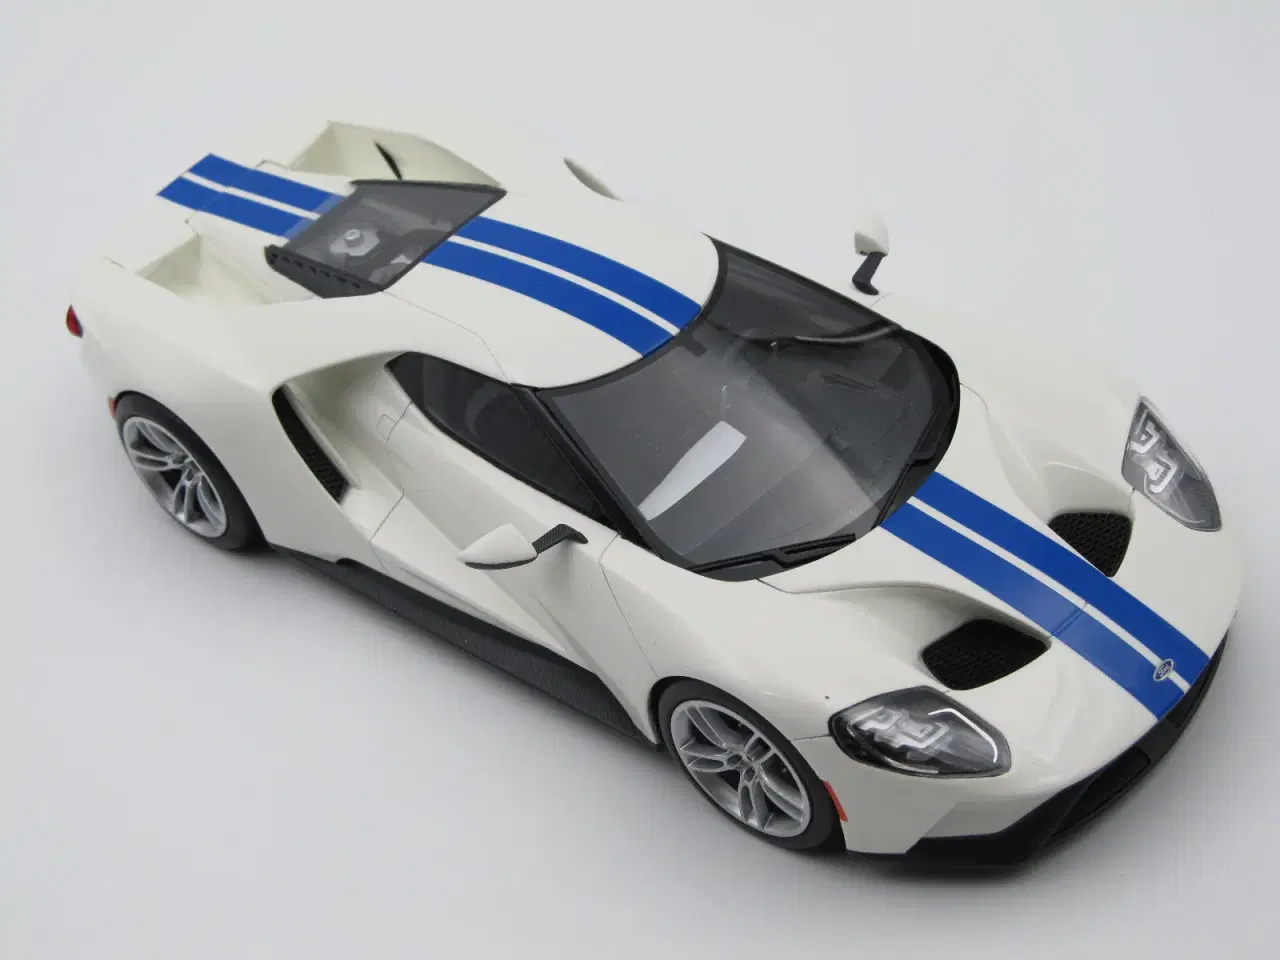 Billede 5 - 2016 Ford GT Shelby Limited Edition - 1:18